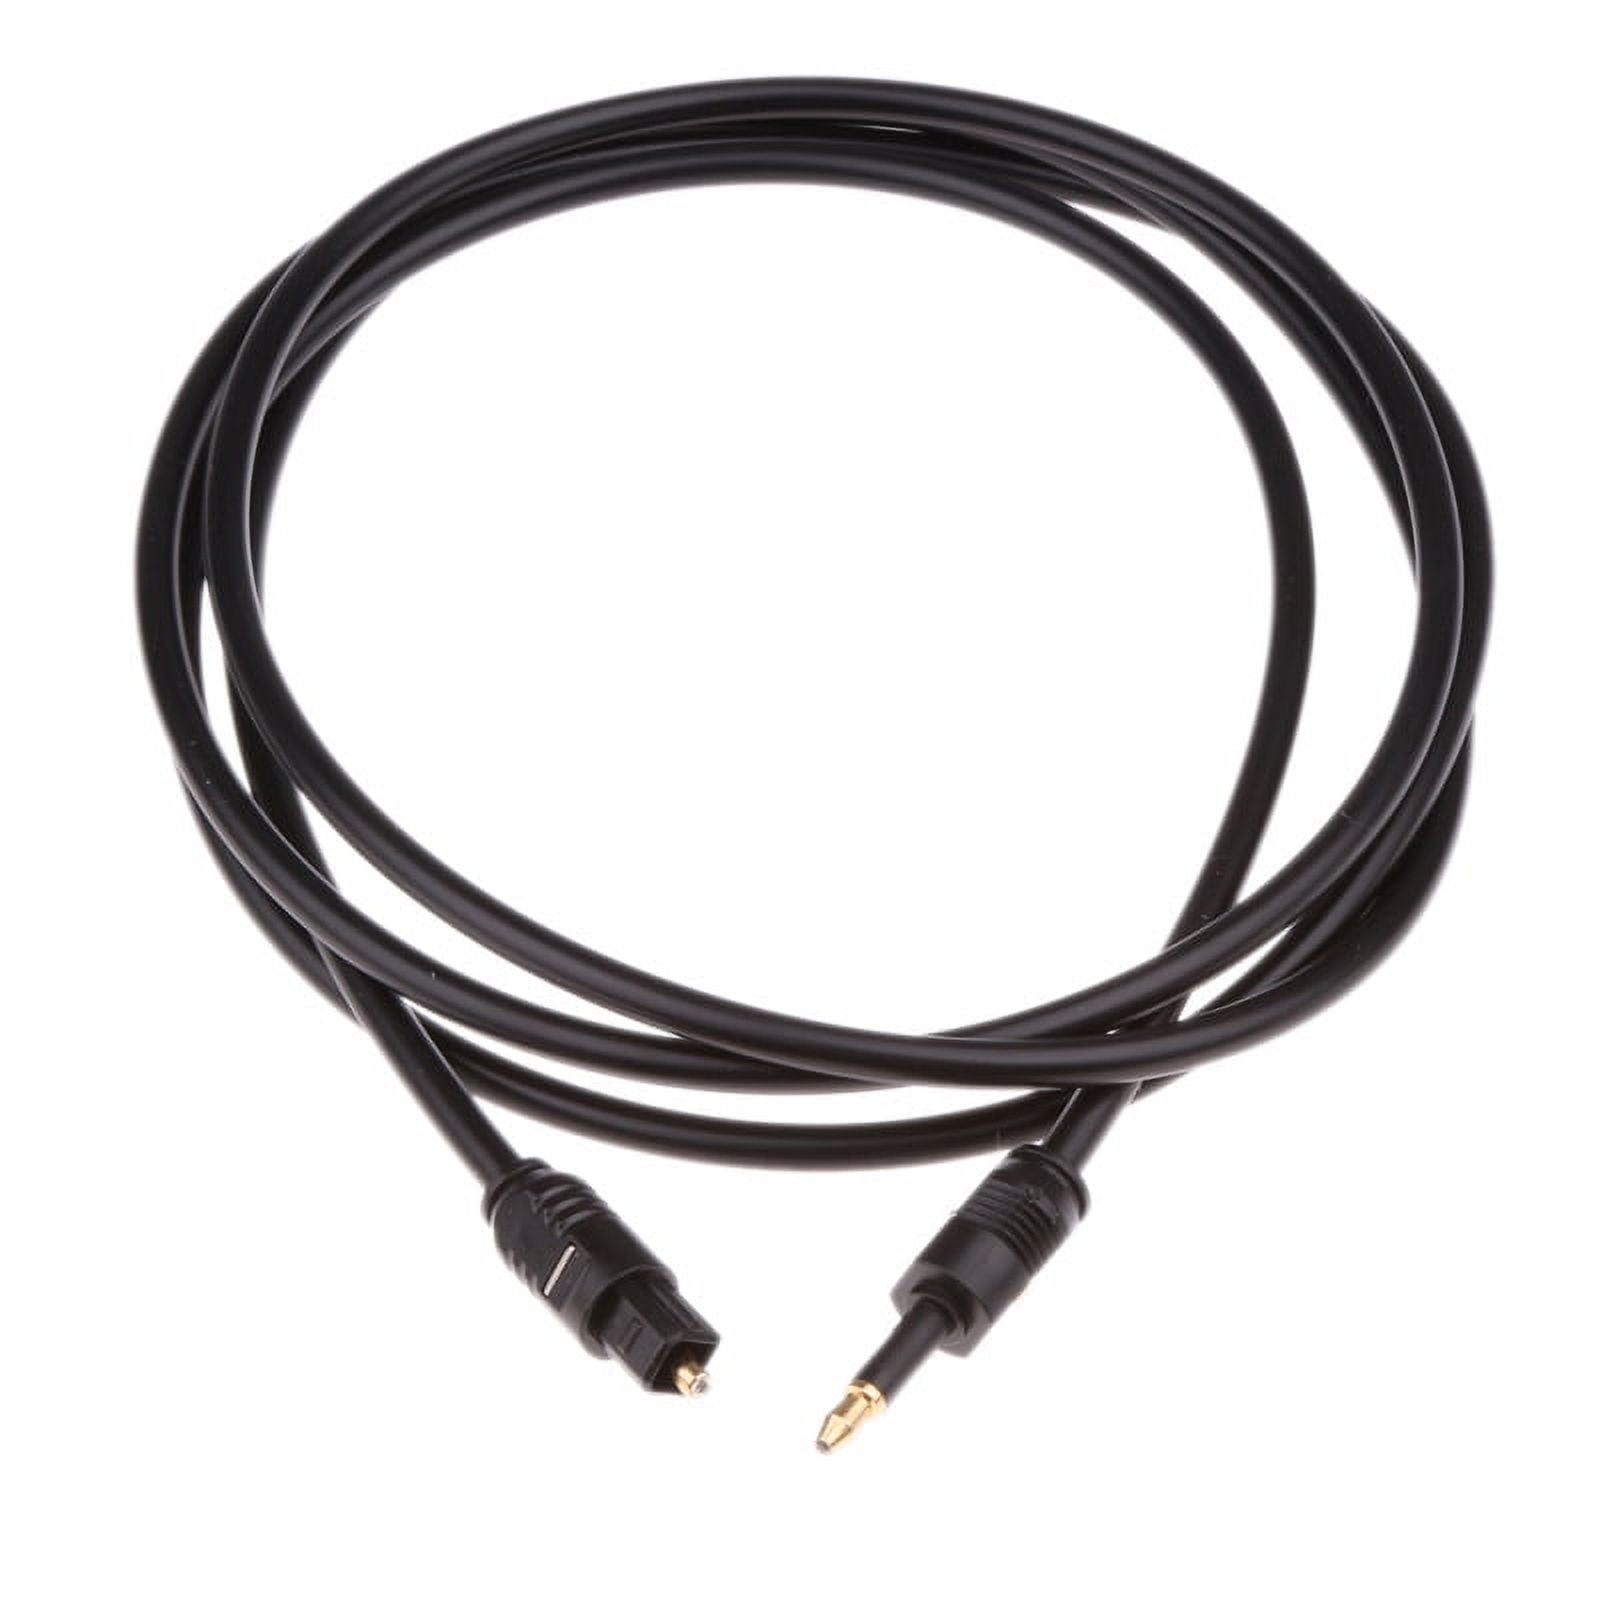 Toslink Digital Optical Audio Cable 5m - Cable Óptico